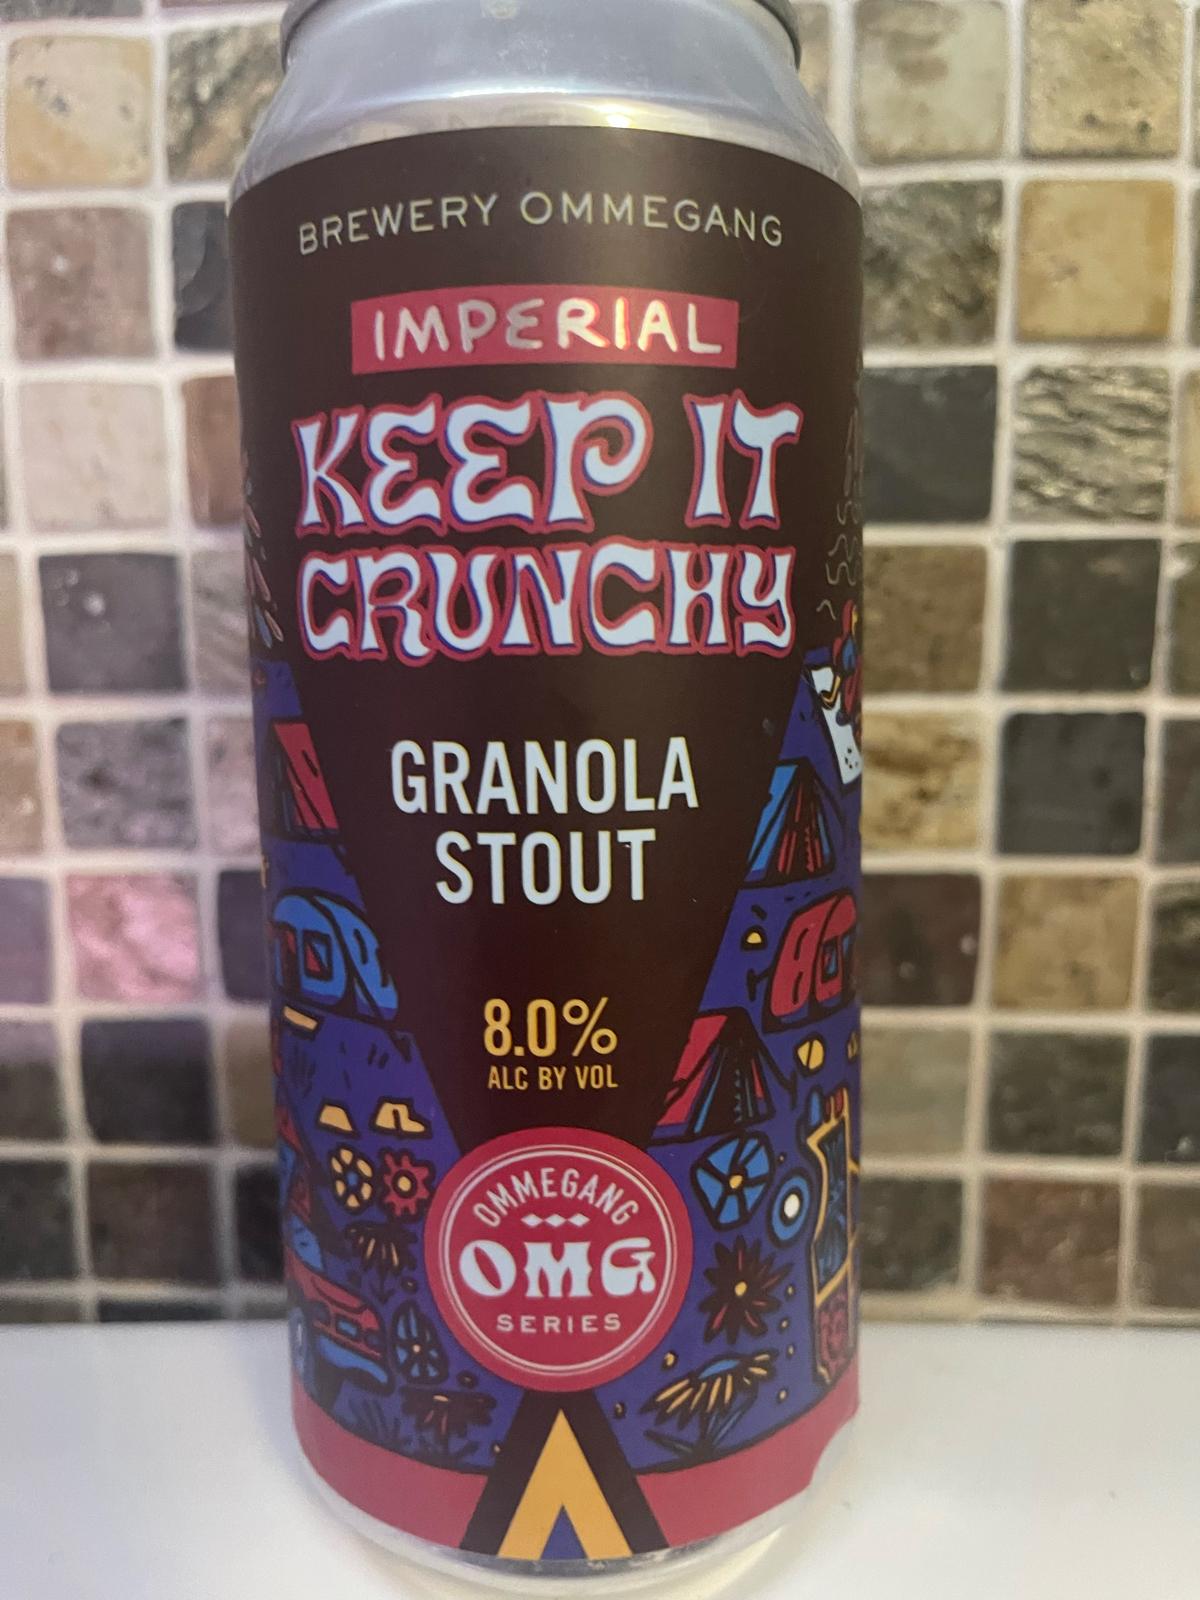 Keep It Crunchy Granola Stout - Imperial